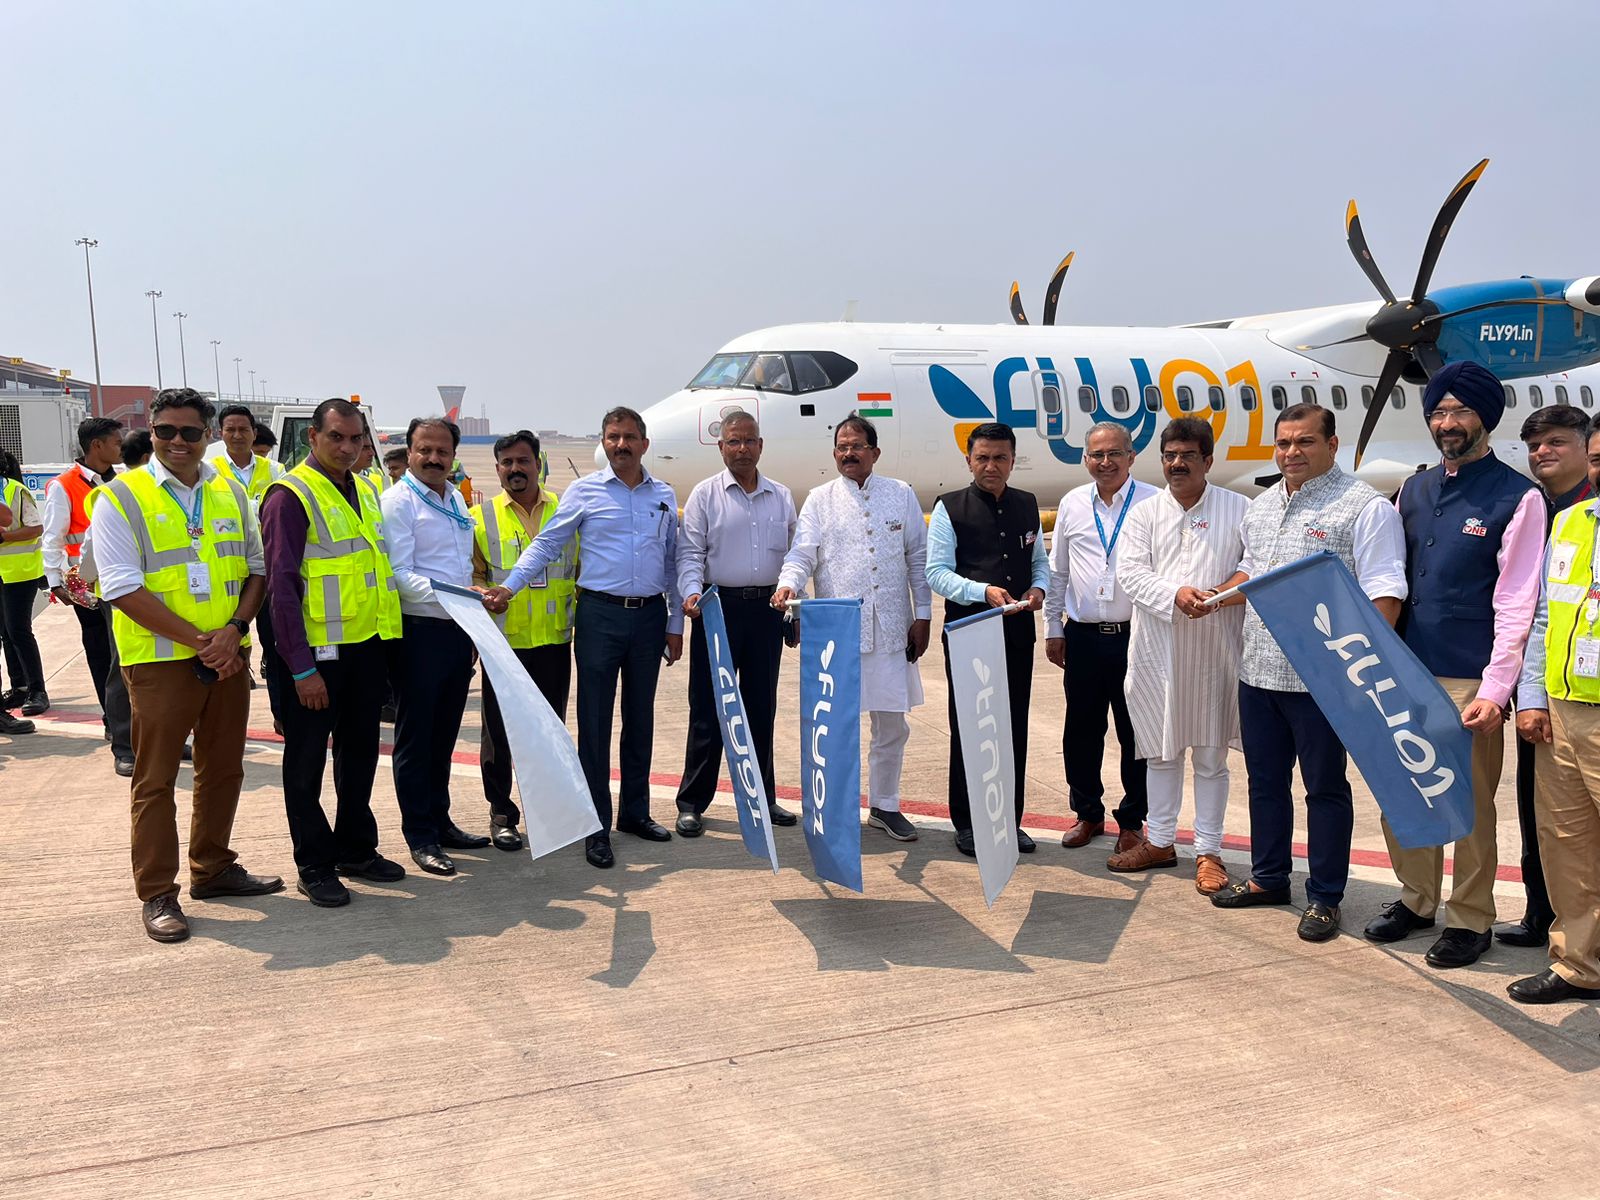 FLY91 to operate commercial flights from March 18 connecting 4 towns in Phase 1